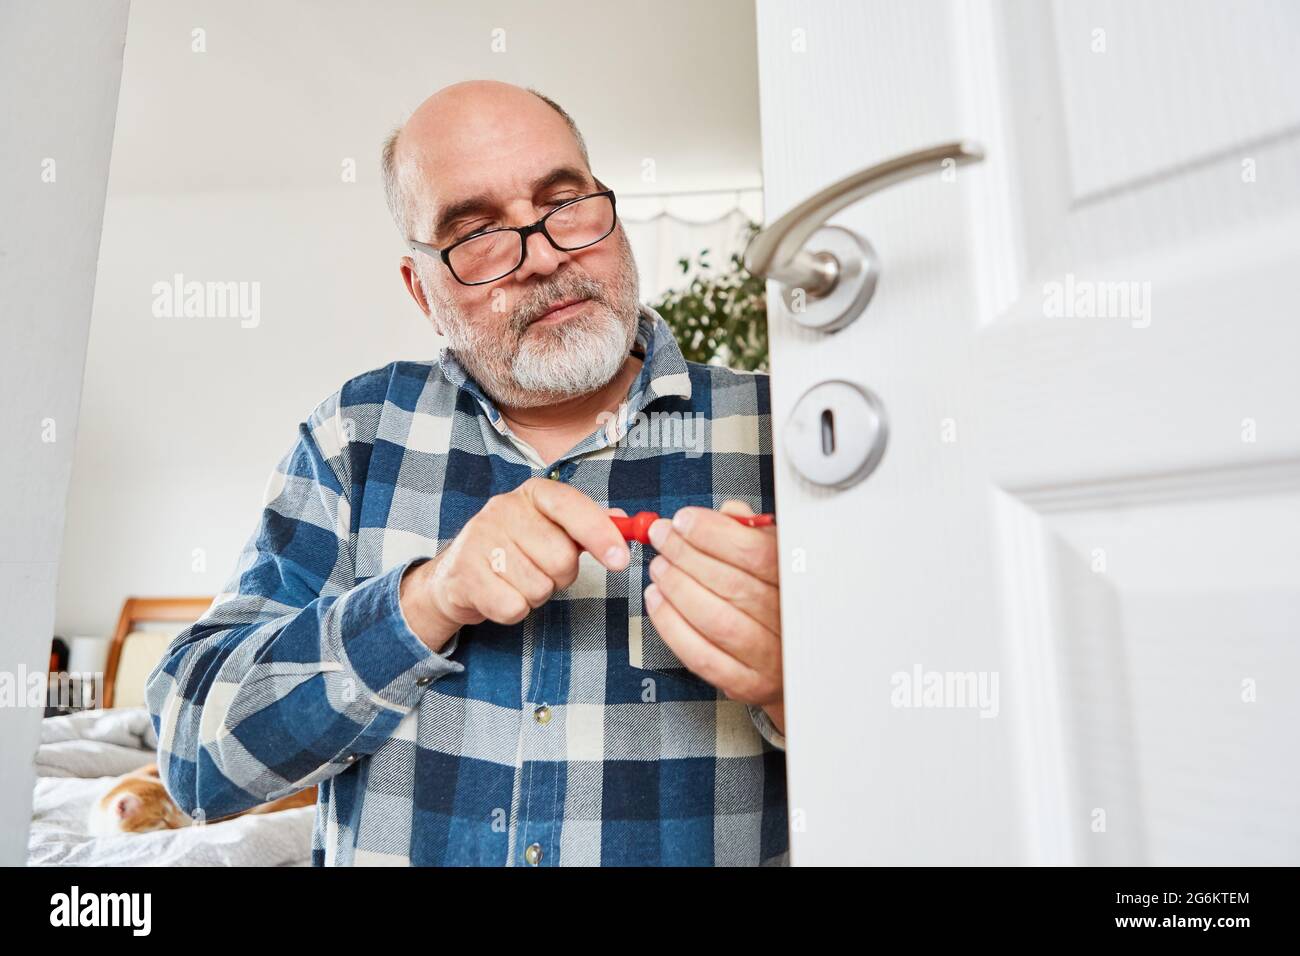 Craftsman or do-it-yourselfer repairs or changes door lock with screwdriver Stock Photo